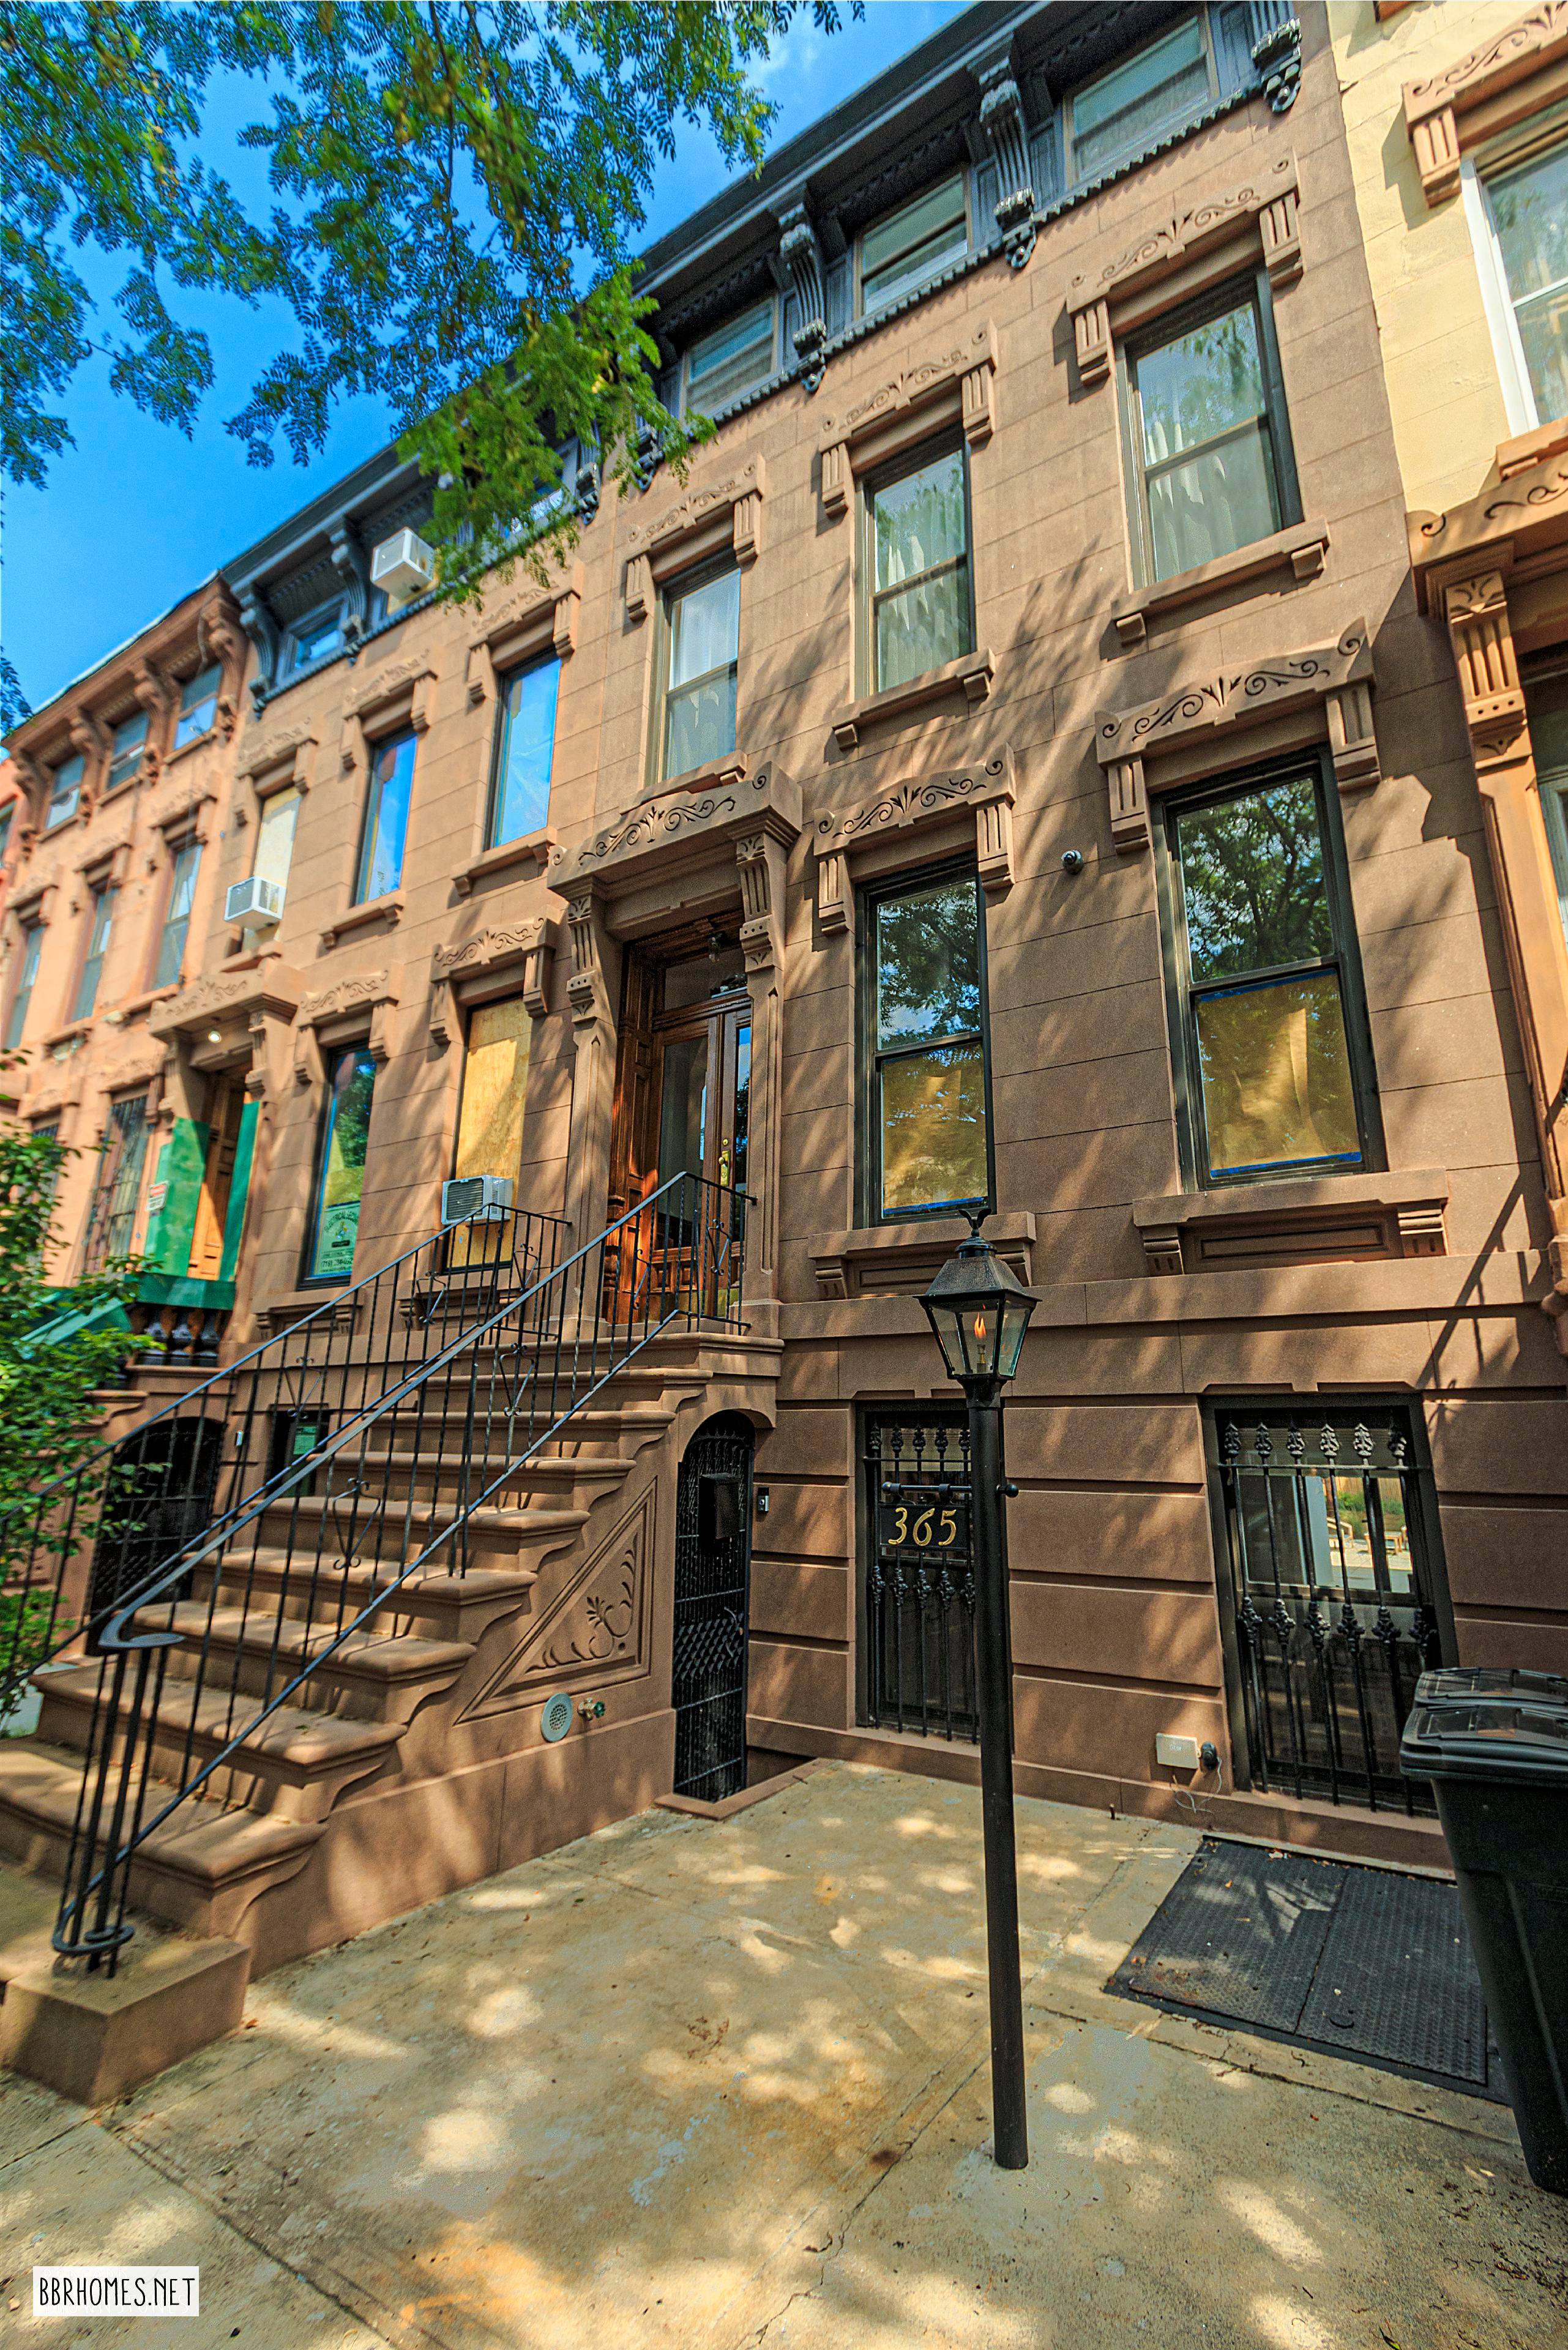 365 Hancock Street is a 4 story 4 family brownstone on one of the best tree lined, uniform blocks in prime Bedford Stuyvesant.